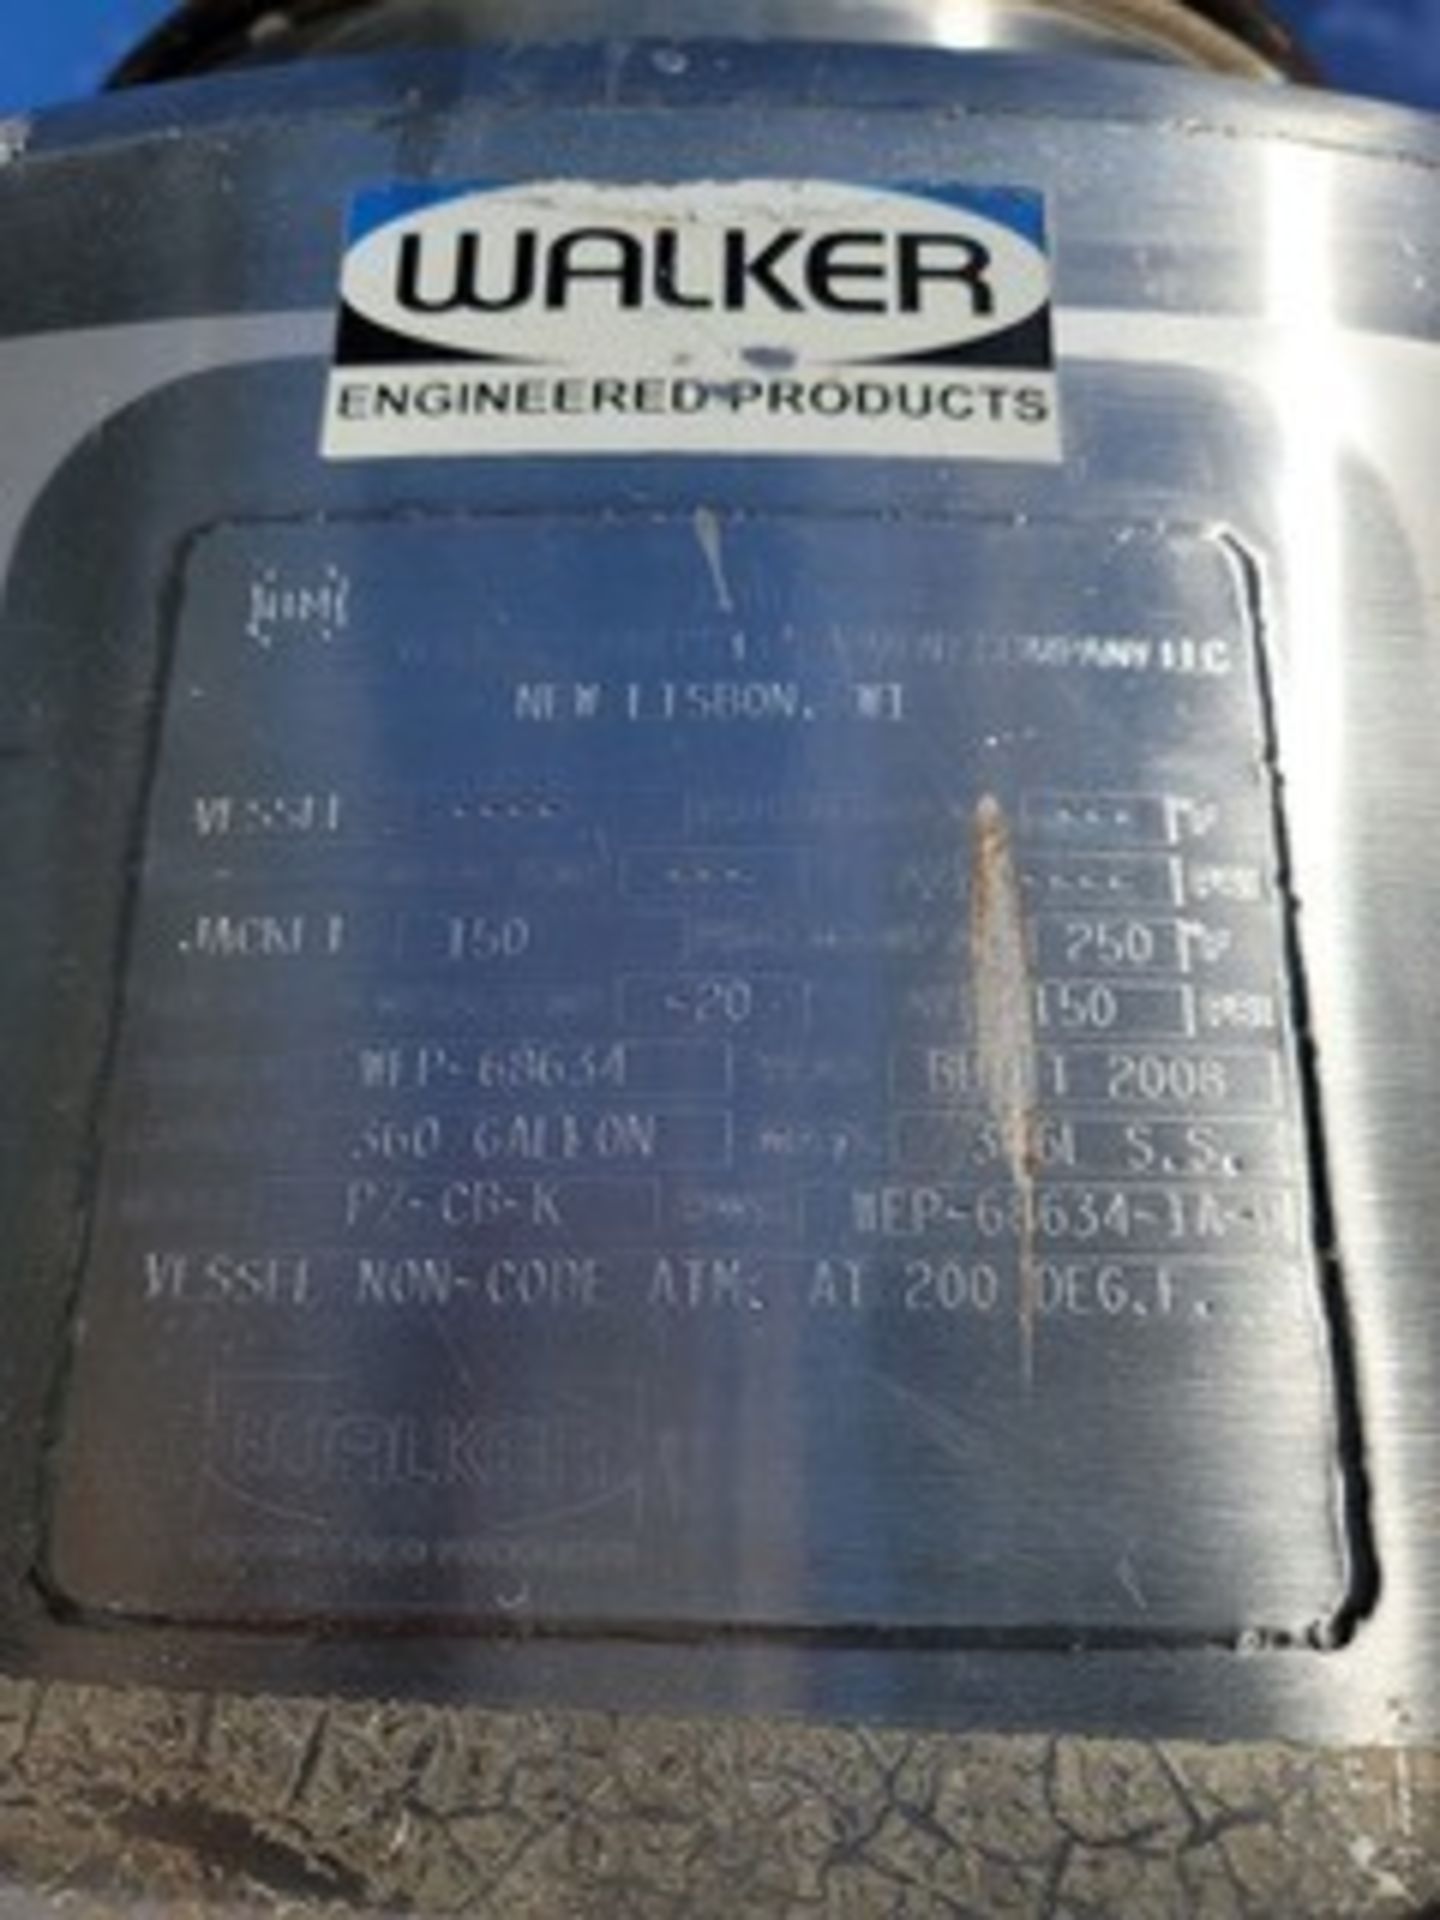 Walker 360 Gal. S/S Steam Jacketed Processing Tank, Model PZ-CB-K, Year: 2008 with 316L Stainless - Image 3 of 4